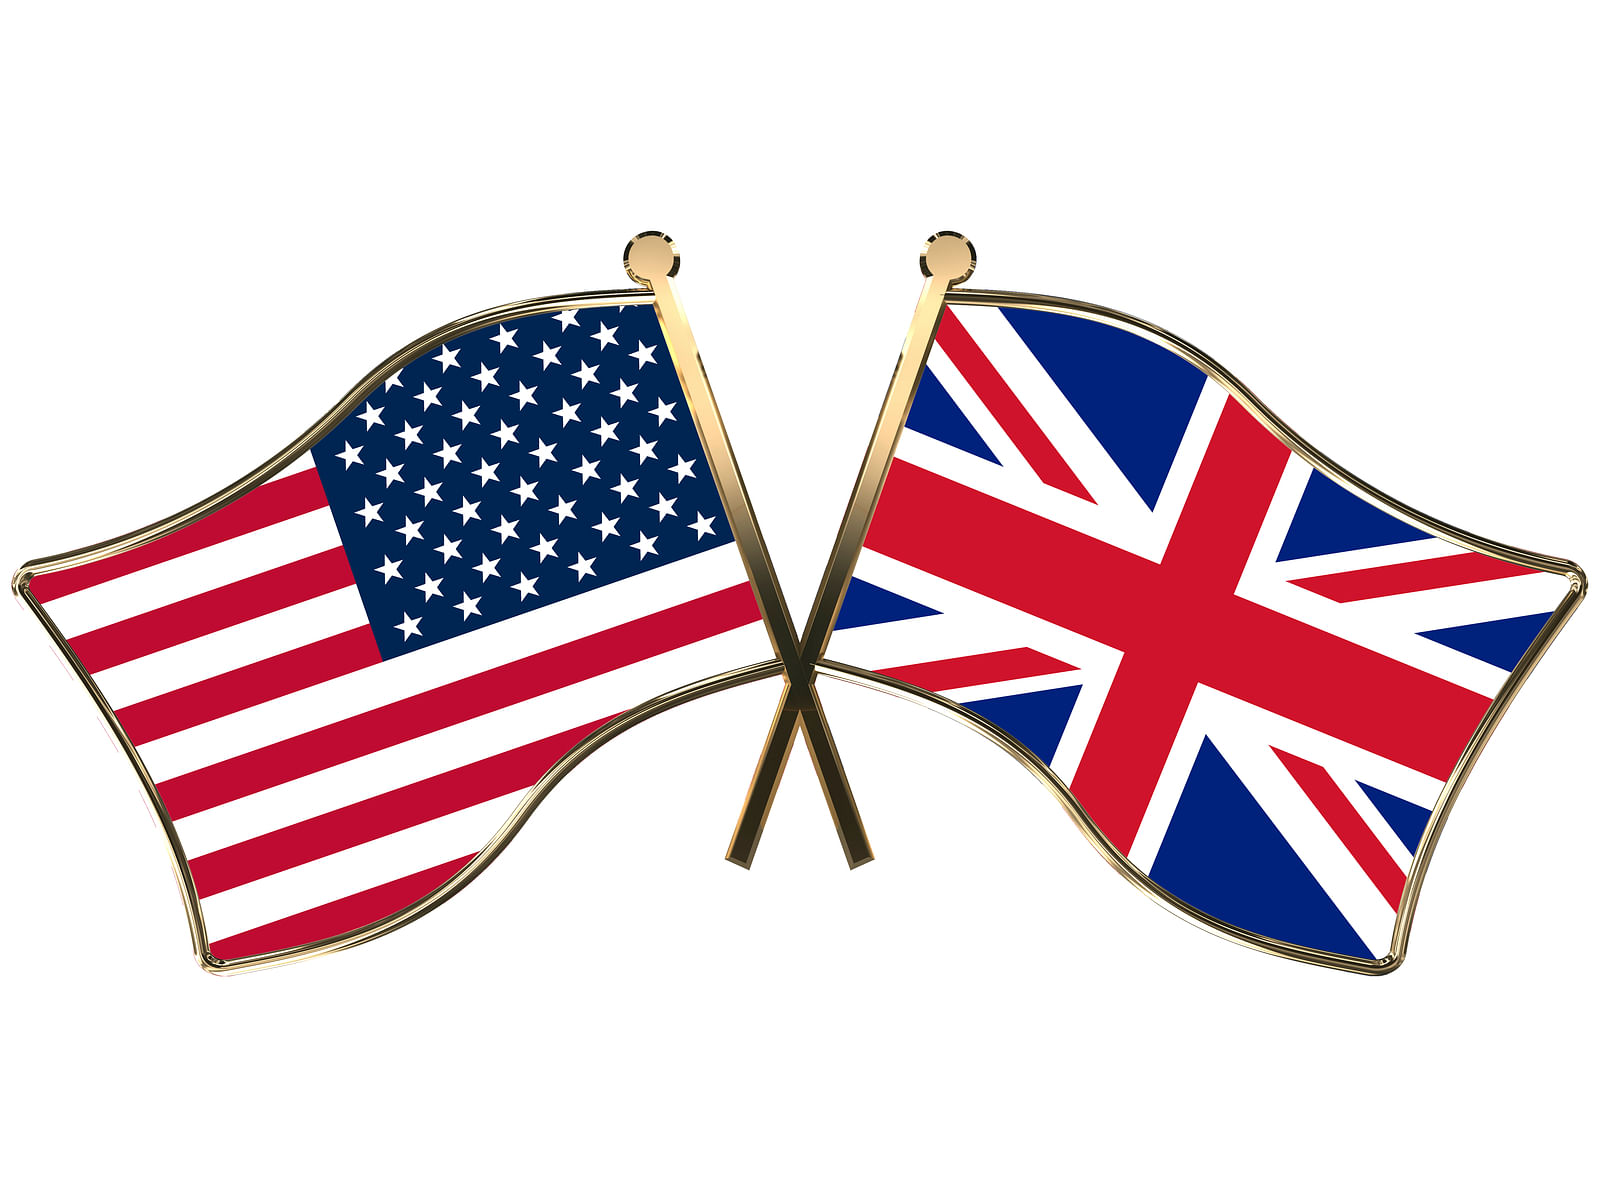 

Britain’s decision to leave the EU could be damaging for the “special relationship” between two countries. Image used for representation purpose. (Photo: iStockphoto)